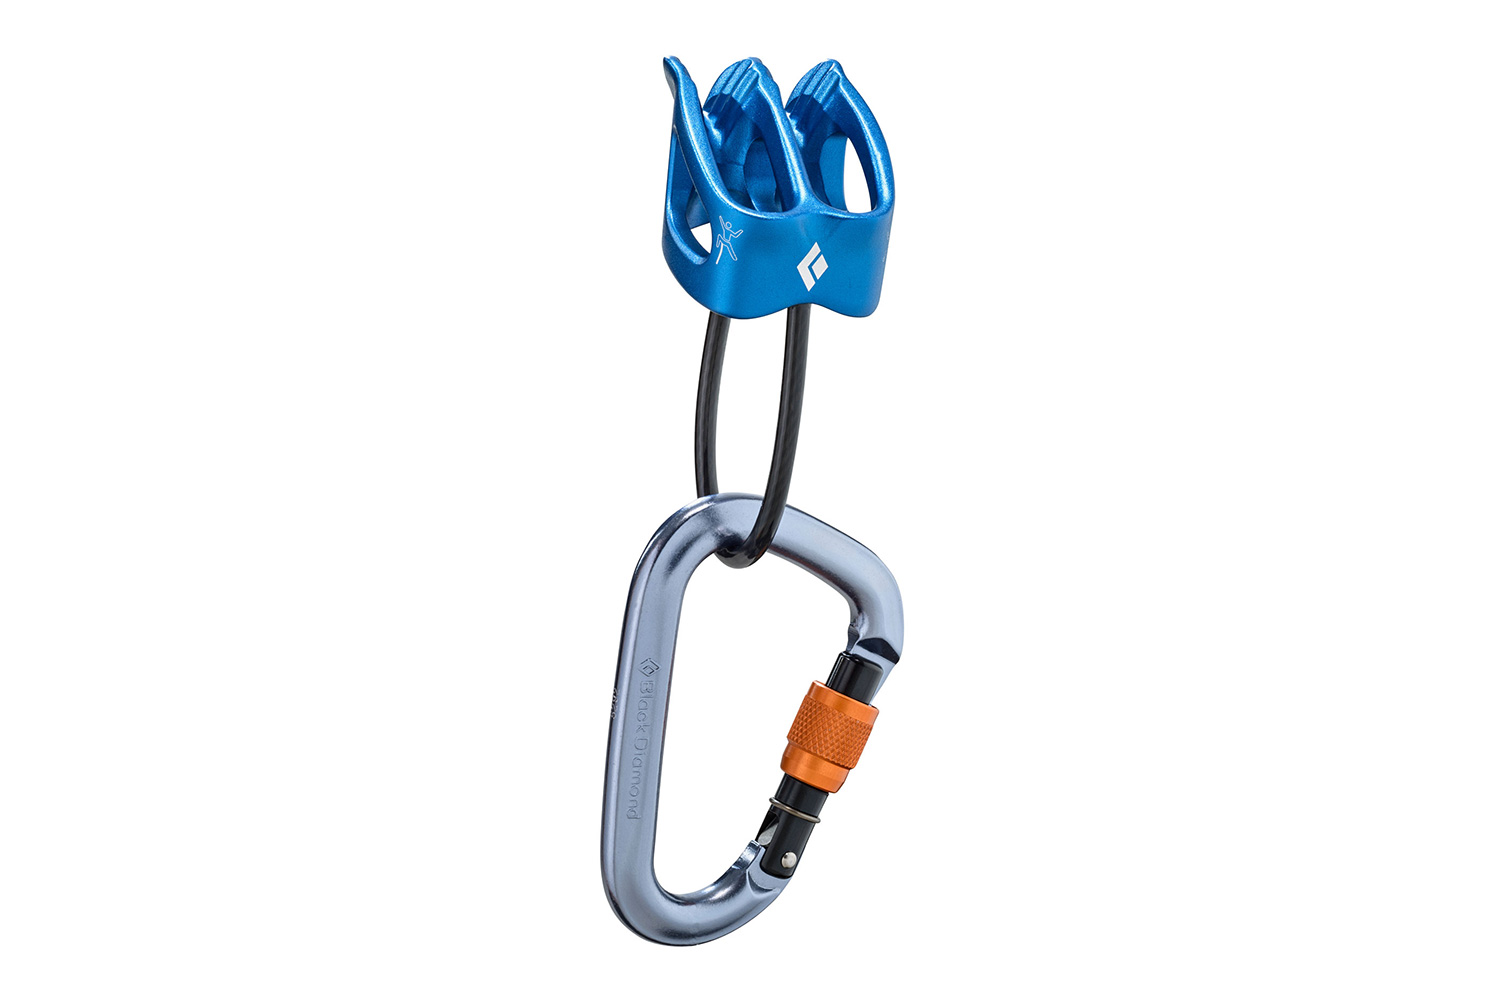 Rappelling Devices for beginners and advanced. Know your devices. 